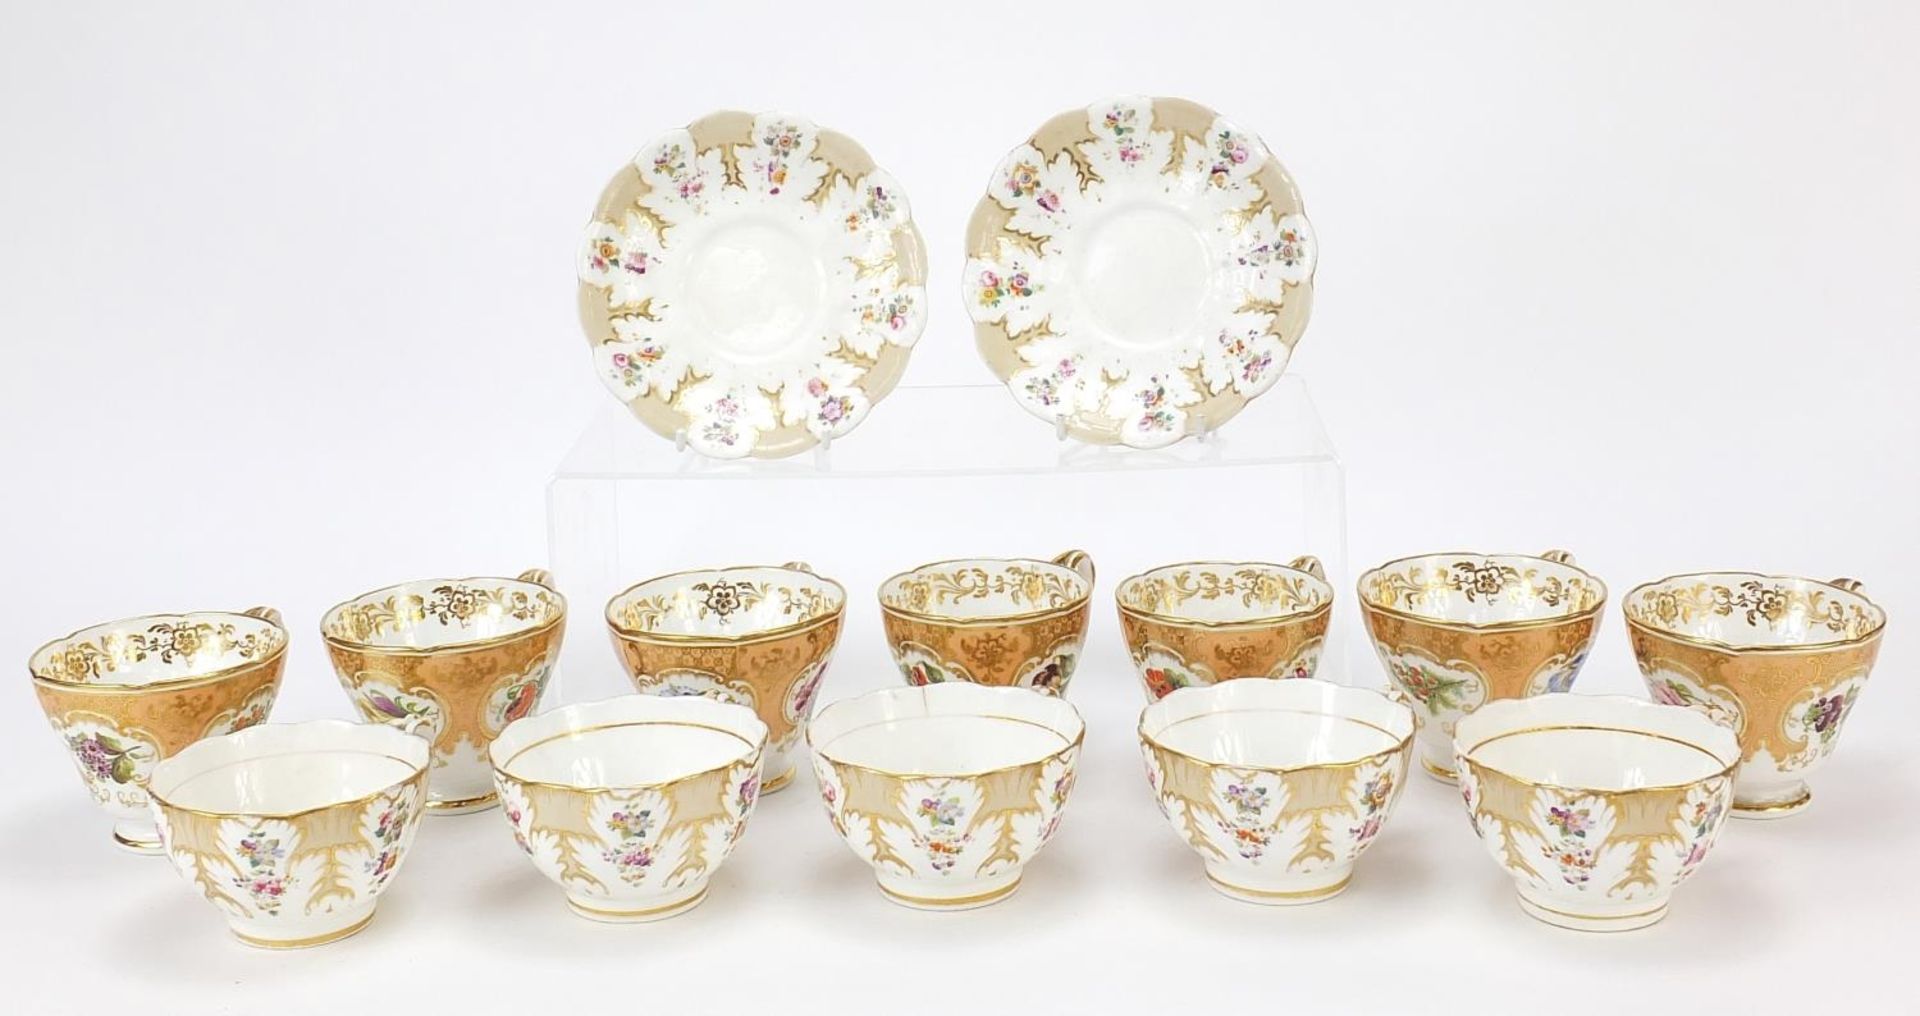 Early 19th century English teaware hand painted with flowers, patter number 174 and 2253, the